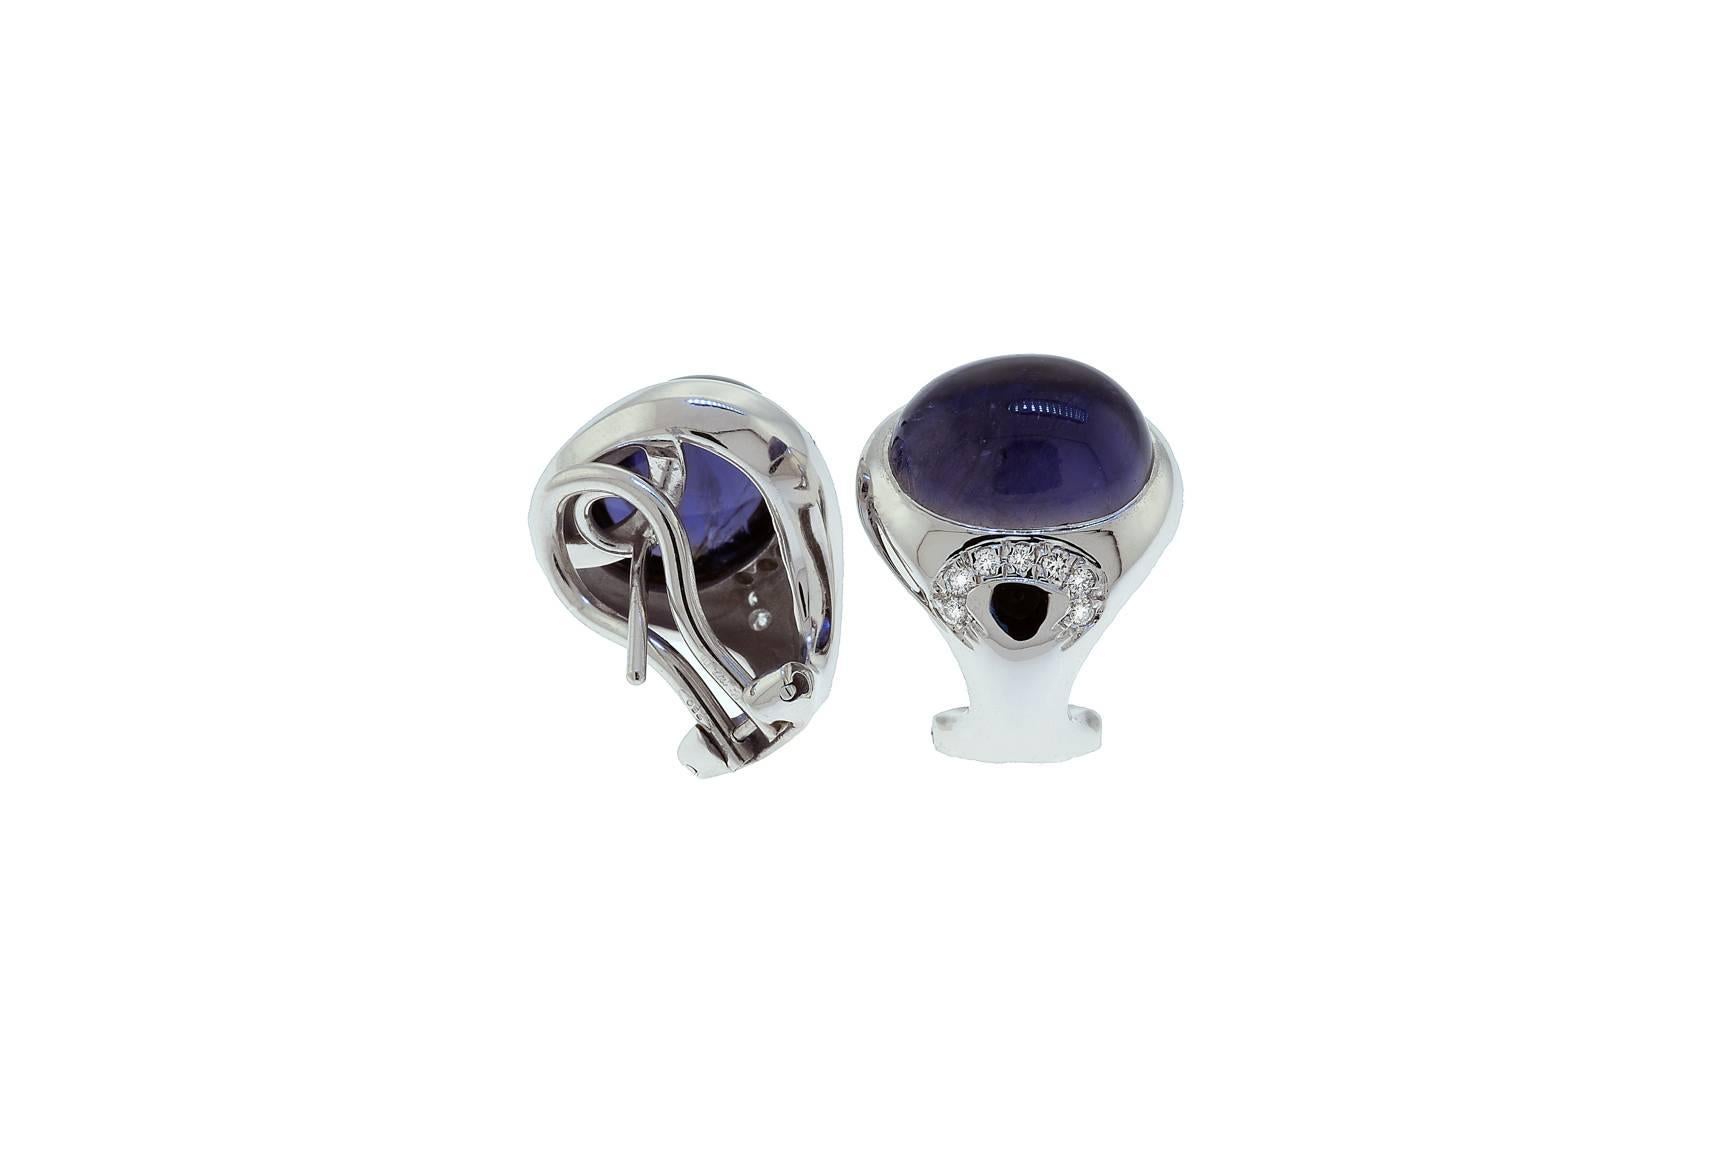 18K white gold earring with Iolite cabochons and diamonds. Each iolite cabochon measures approximately 10x12mm. The earrings have a clip and a post.